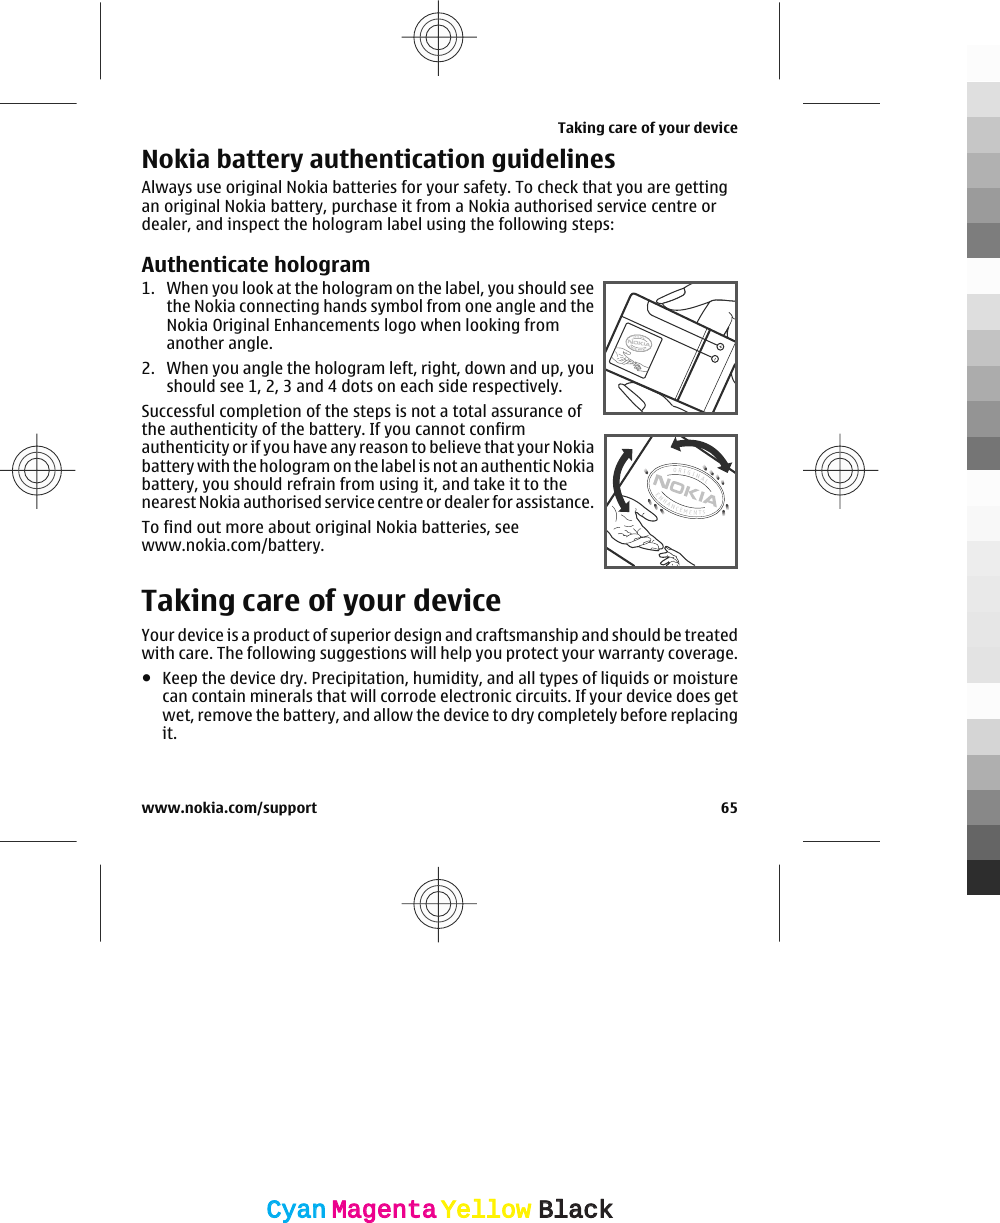 Nokia battery authentication guidelinesAlways use original Nokia batteries for your safety. To check that you are gettingan original Nokia battery, purchase it from a Nokia authorised service centre ordealer, and inspect the hologram label using the following steps:Authenticate hologram1. When you look at the hologram on the label, you should seethe Nokia connecting hands symbol from one angle and theNokia Original Enhancements logo when looking fromanother angle.2. When you angle the hologram left, right, down and up, youshould see 1, 2, 3 and 4 dots on each side respectively.Successful completion of the steps is not a total assurance ofthe authenticity of the battery. If you cannot confirmauthenticity or if you have any reason to believe that your Nokiabattery with the hologram on the label is not an authentic Nokiabattery, you should refrain from using it, and take it to thenearest Nokia authorised service centre or dealer for assistance.To find out more about original Nokia batteries, seewww.nokia.com/battery.Taking care of your deviceYour device is a product of superior design and craftsmanship and should be treatedwith care. The following suggestions will help you protect your warranty coverage.●Keep the device dry. Precipitation, humidity, and all types of liquids or moisturecan contain minerals that will corrode electronic circuits. If your device does getwet, remove the battery, and allow the device to dry completely before replacingit.Taking care of your devicewww.nokia.com/support 65CyanCyanMagentaMagentaYellowYellowBlackBlack